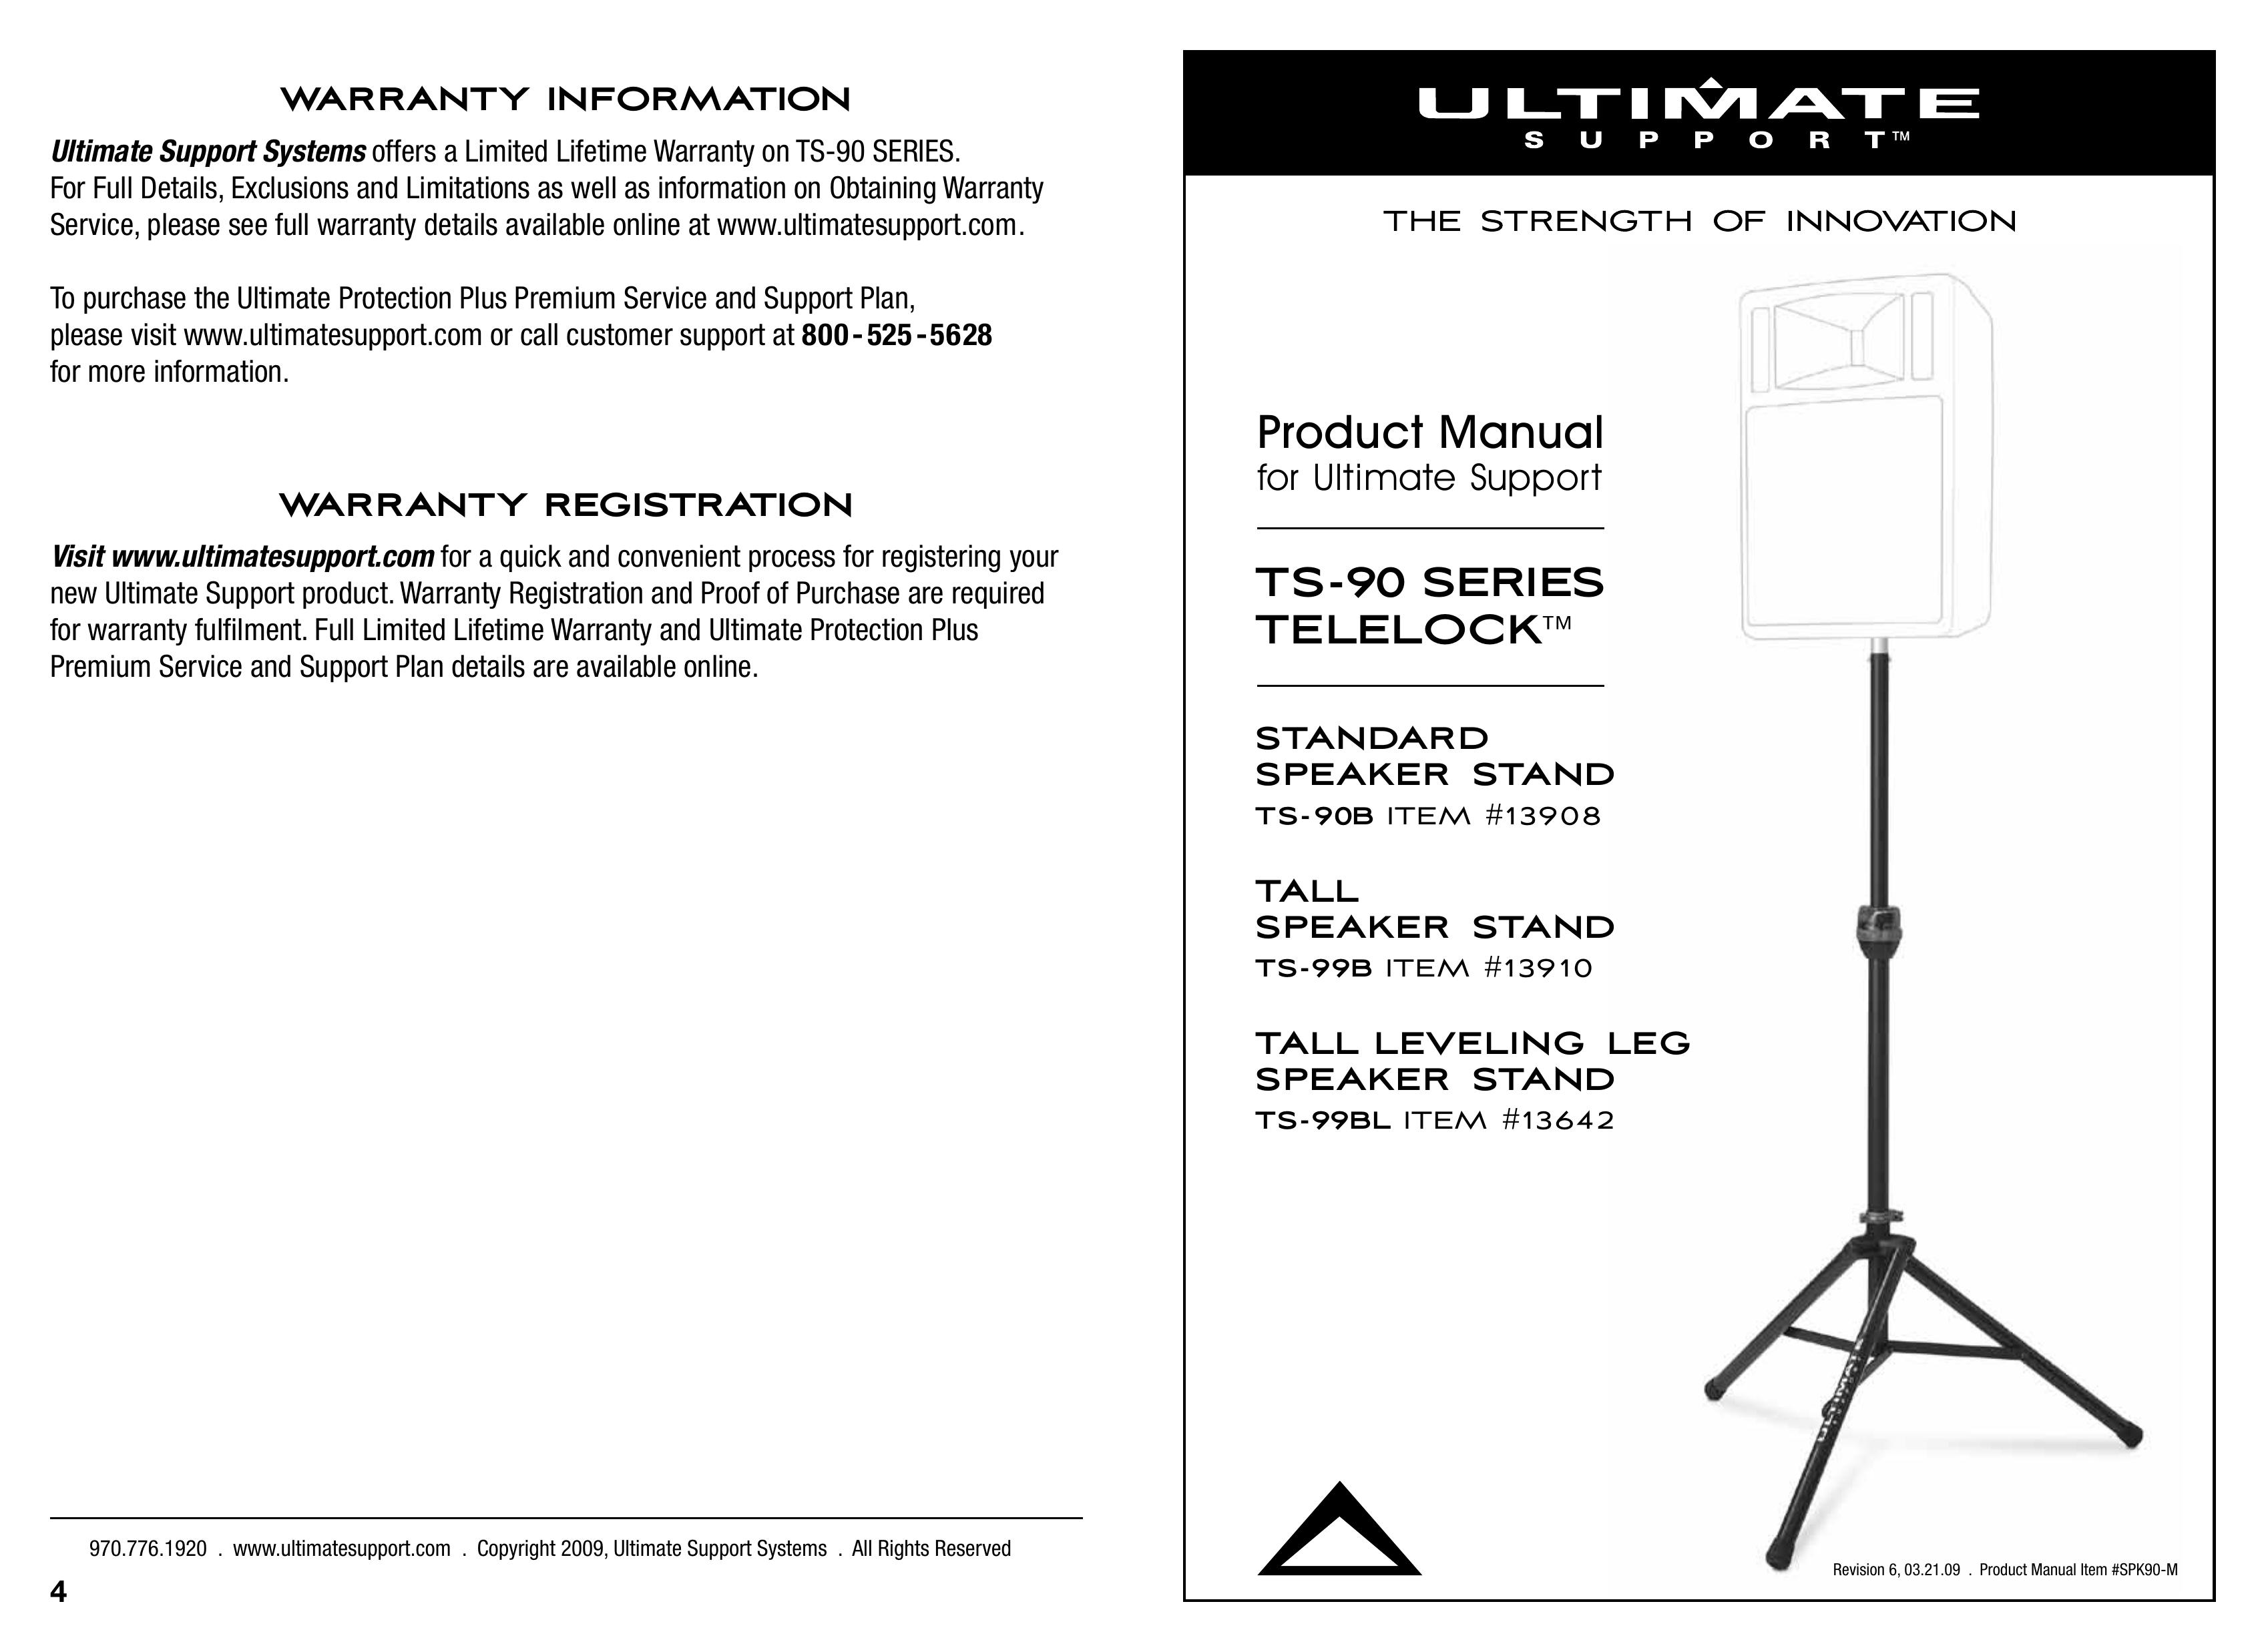 Ultimate Support Systems TS-90 Water Dispenser User Manual